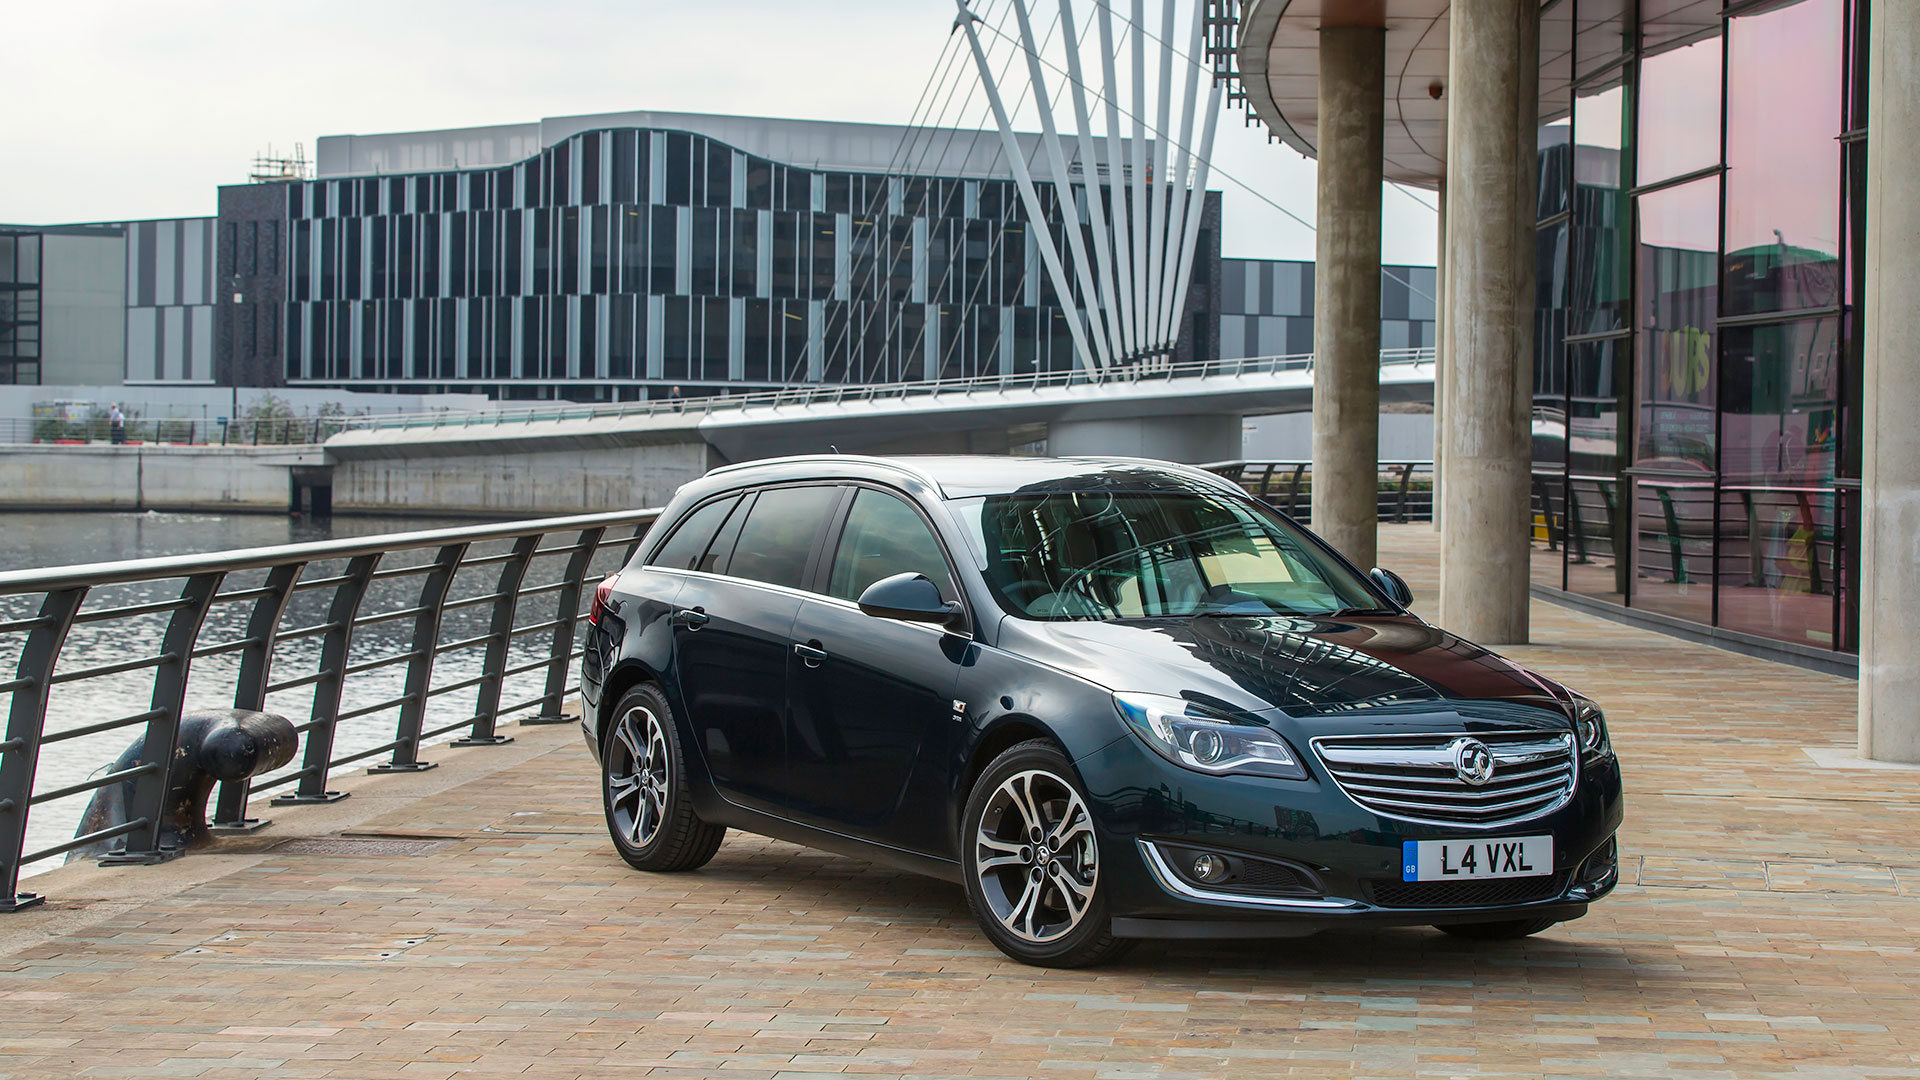 Vauxhall Insignia Estate (2013 - ) review | AutoTrader